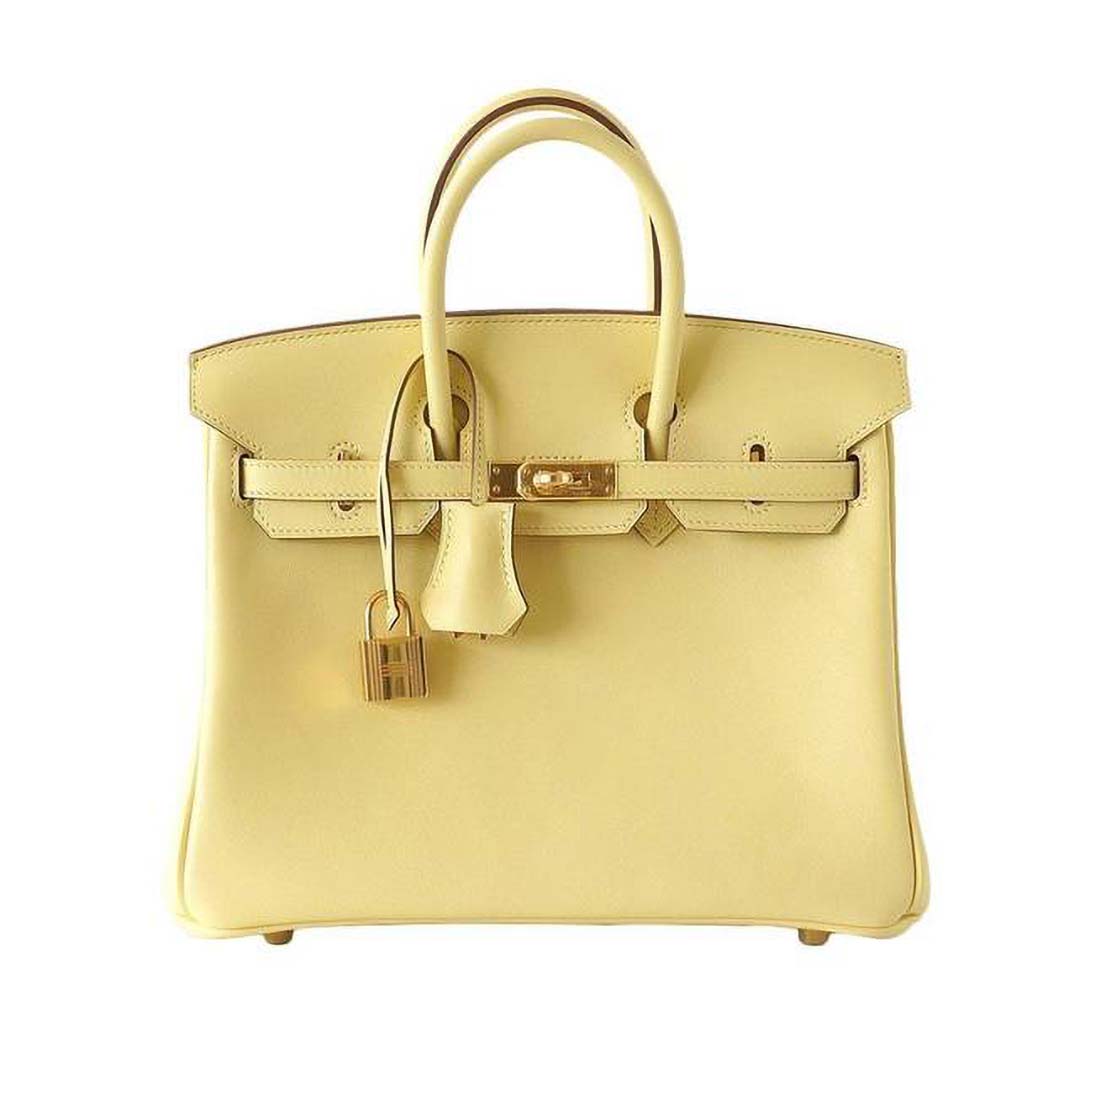 Hermes Birkin 25 Bag in Togo Leather with Gold Hardware-Yellow